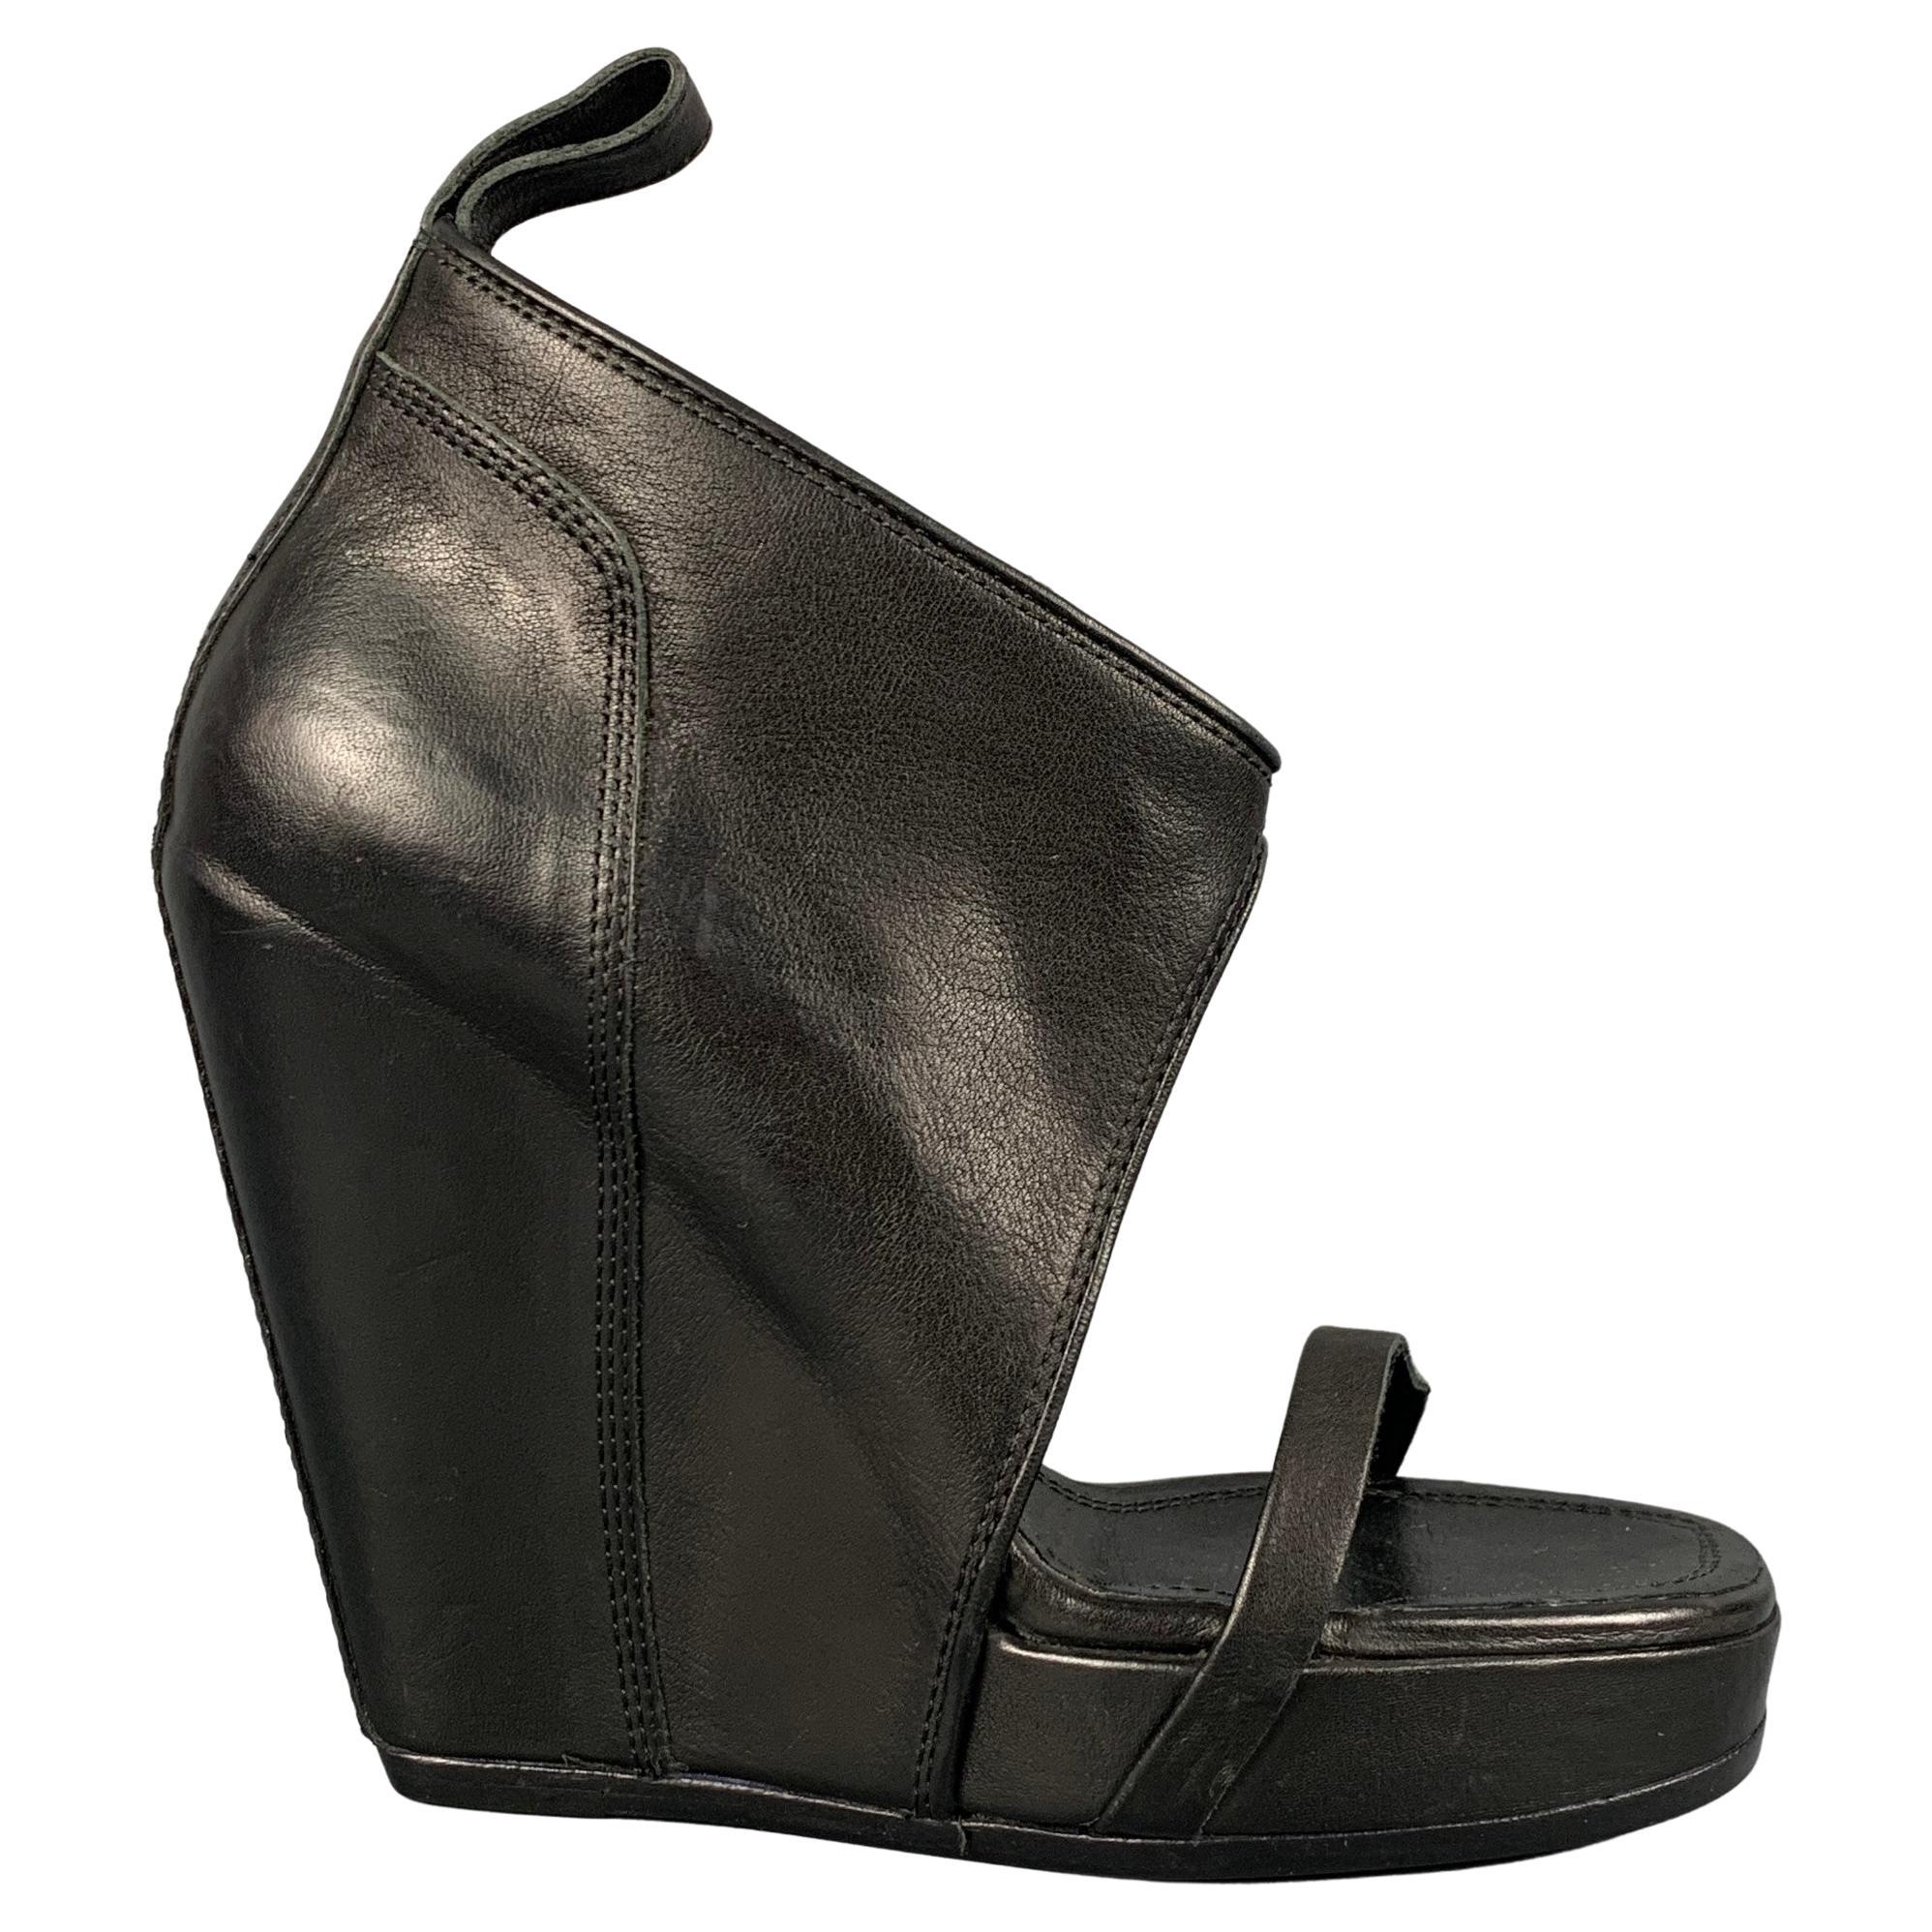 RICK OWENS Size 10 Black Leather Open Toe Wedge Boots